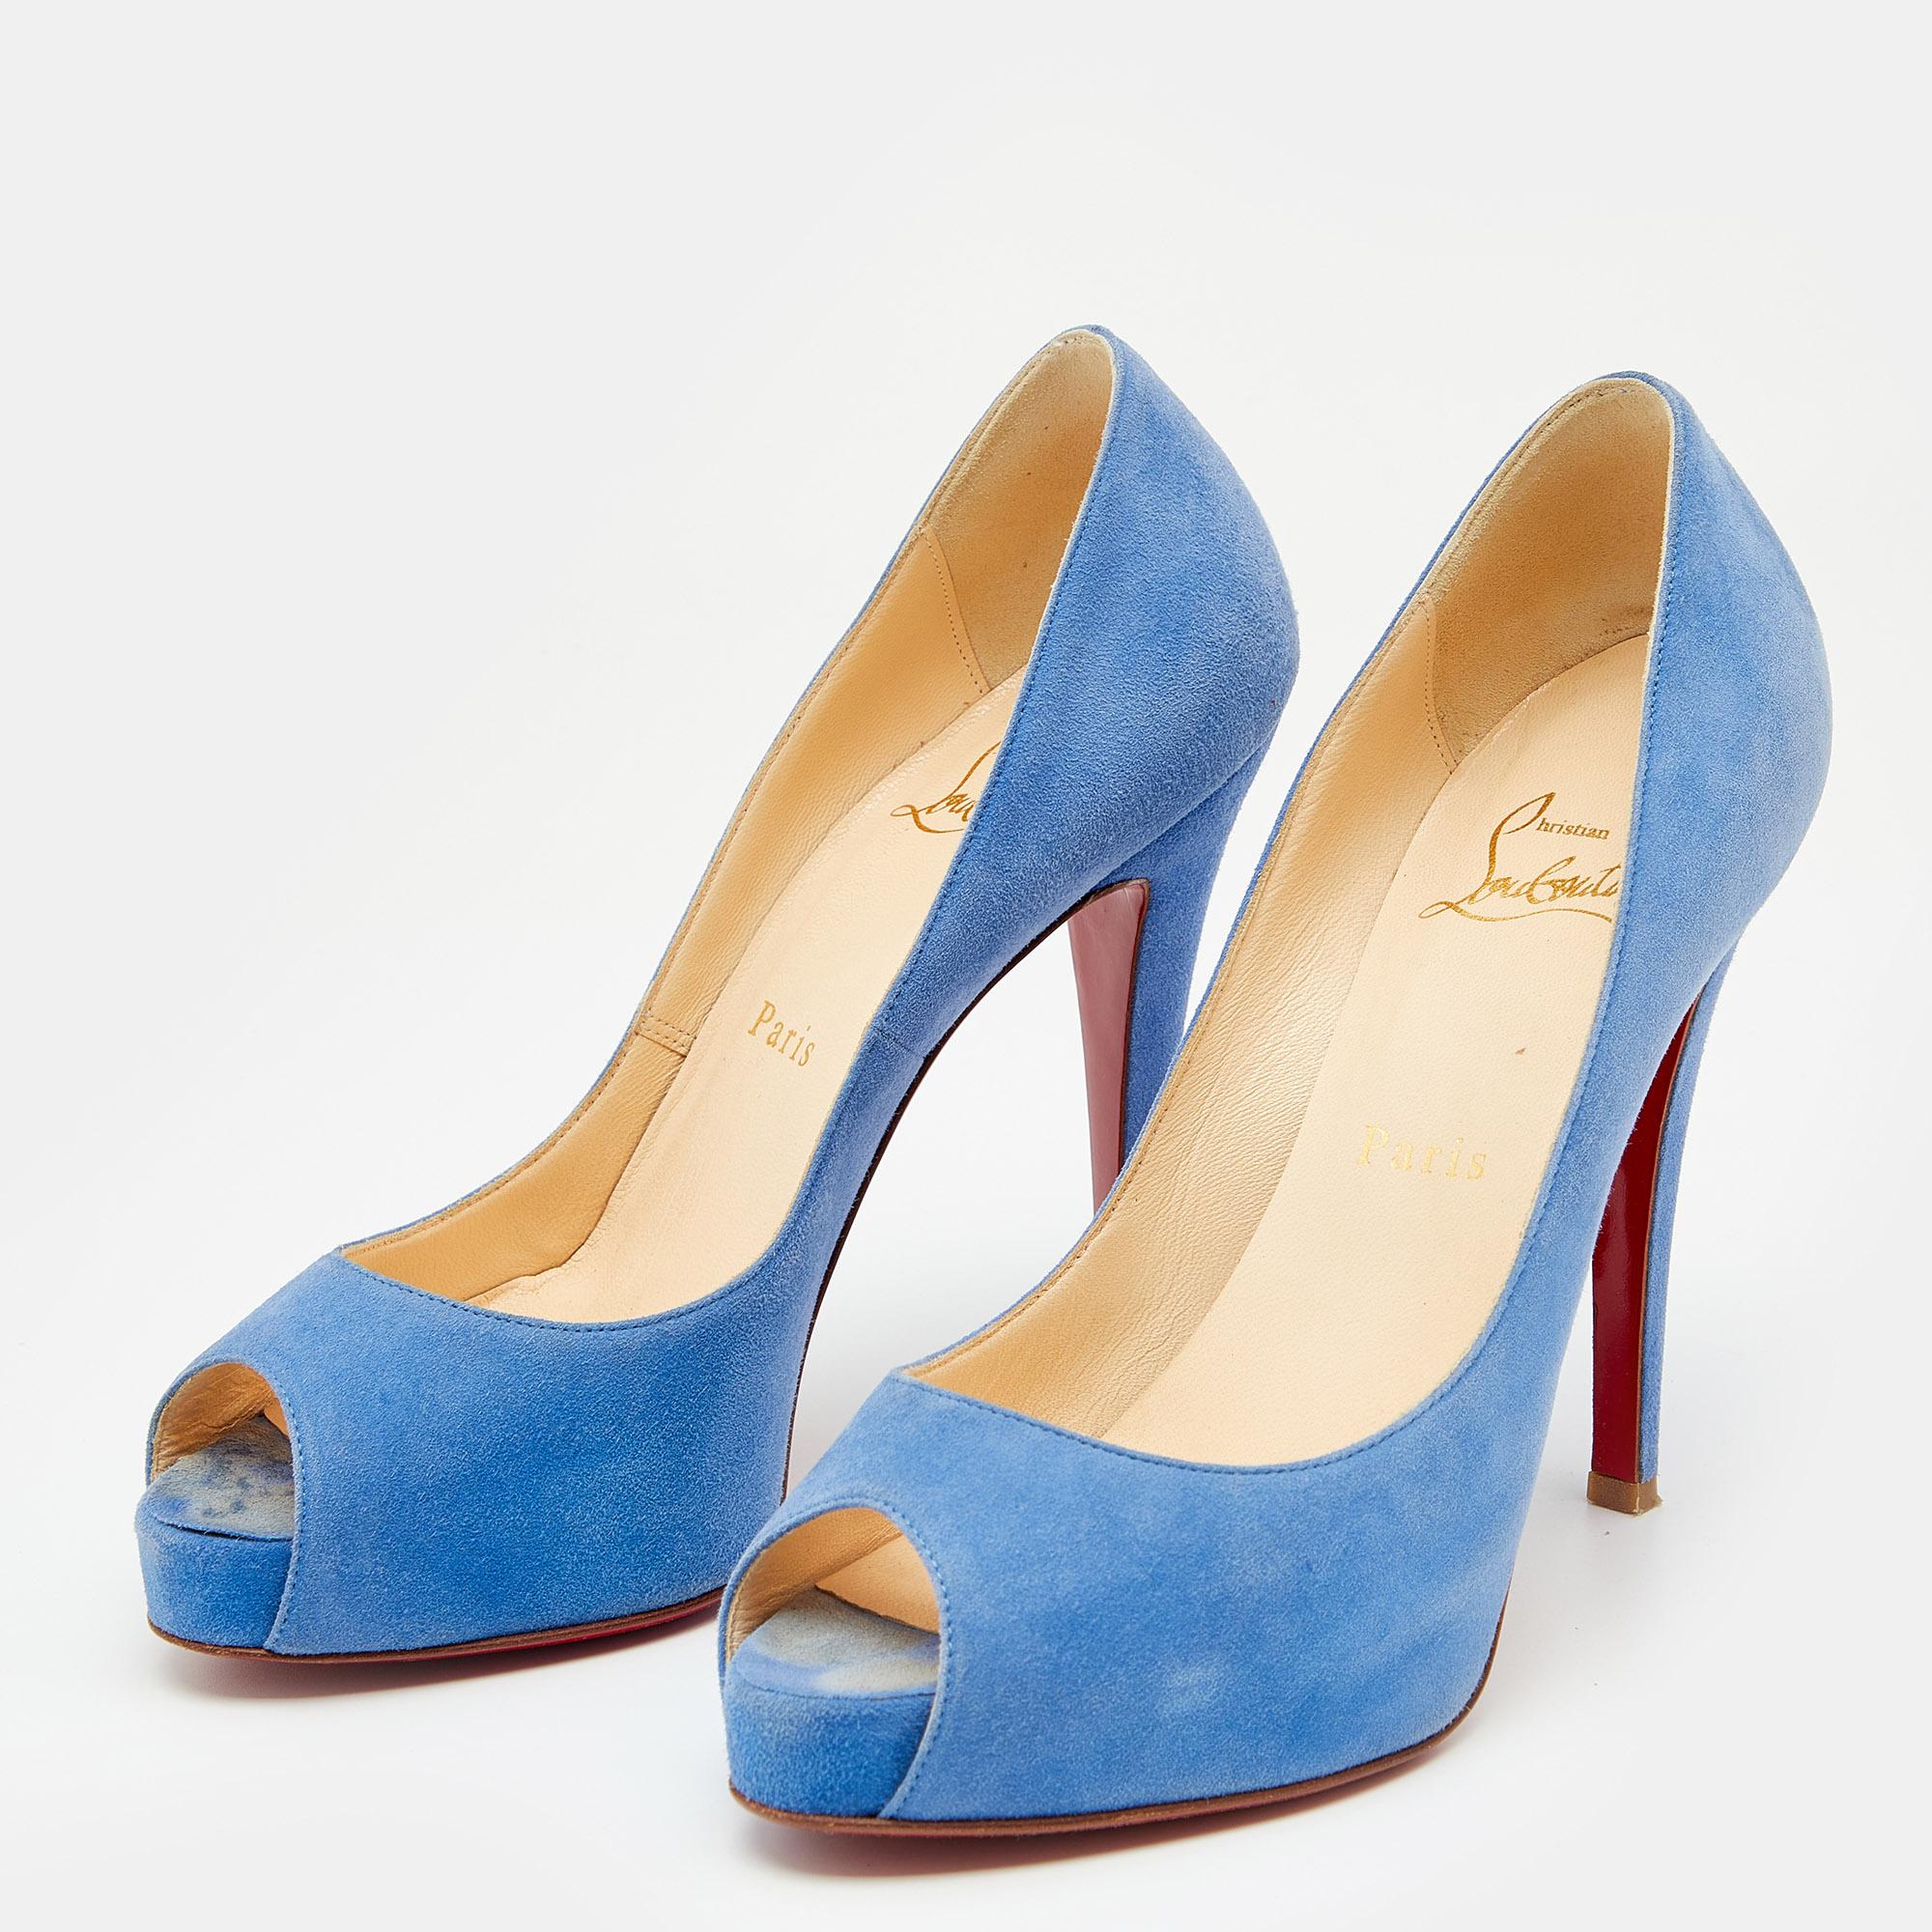 Women's Christian Louboutin Blue Suede New Very Prive Peep Toe Pumps Size 36.5 For Sale